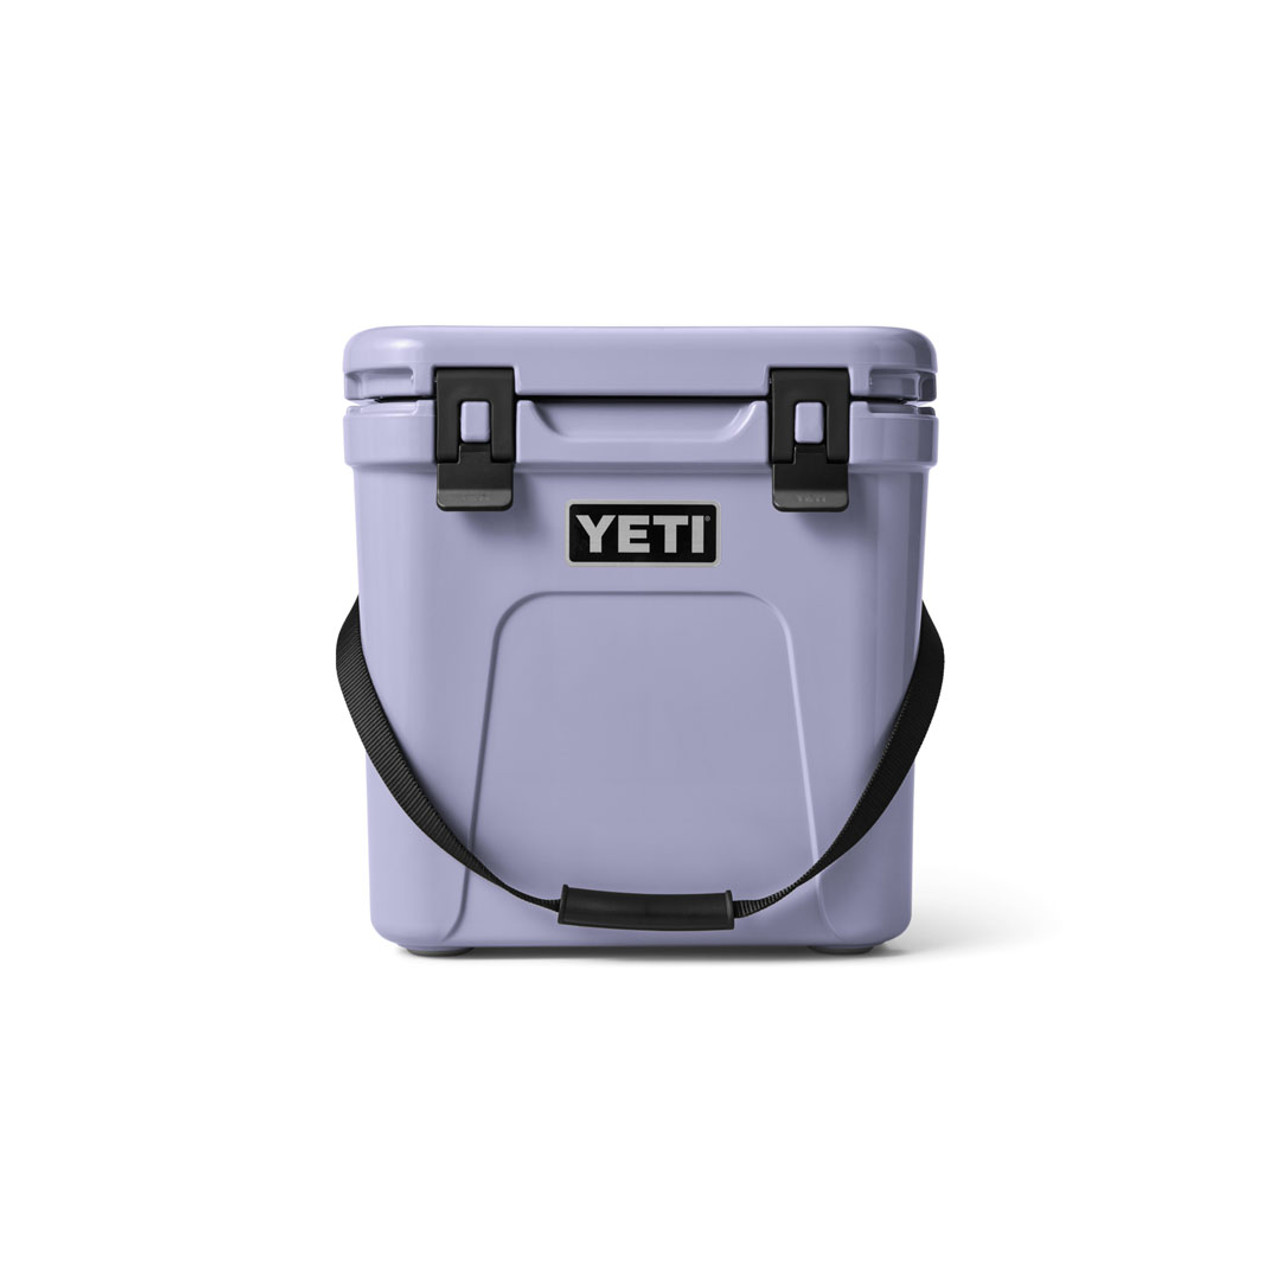 YETI Roadie 24 Insulated Chest Cooler, Ice Pink at